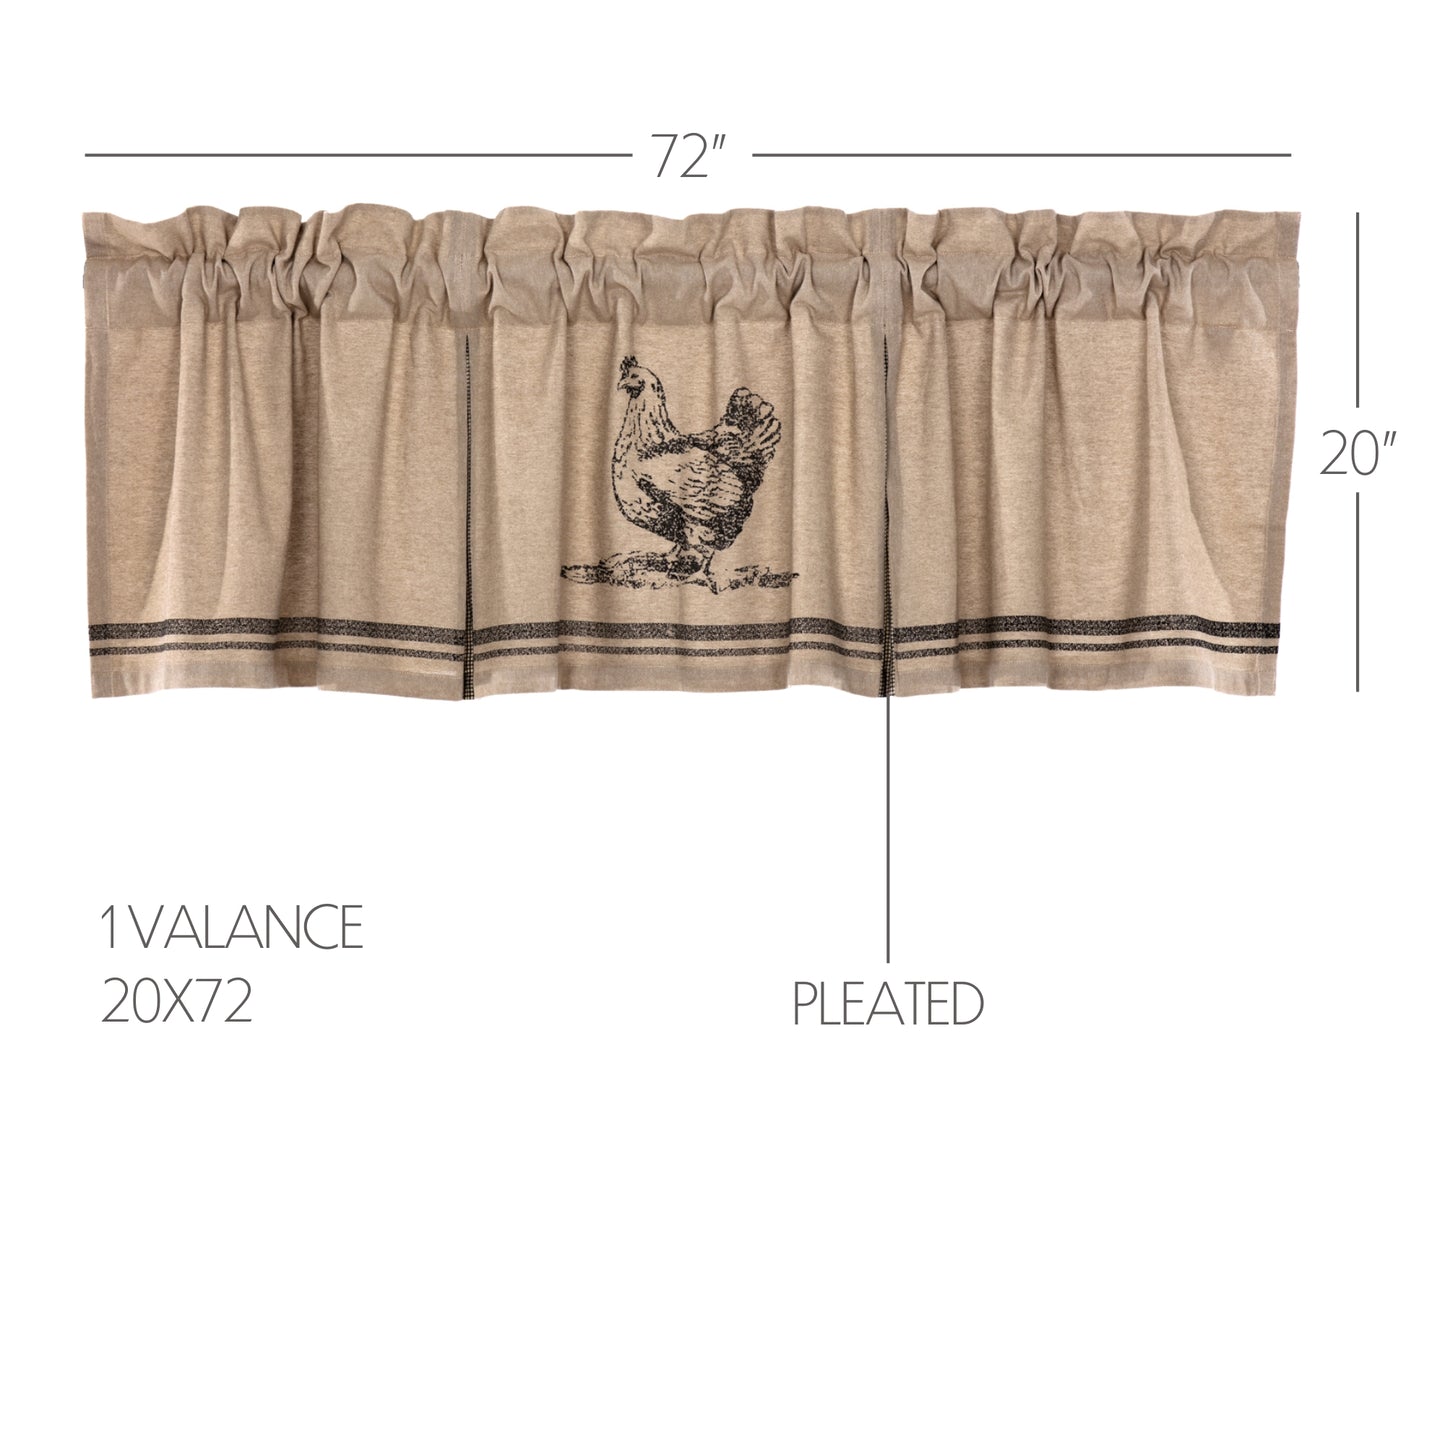 52206-Sawyer-Mill-Charcoal-Chicken-Valance-Pleated-20x72-image-1